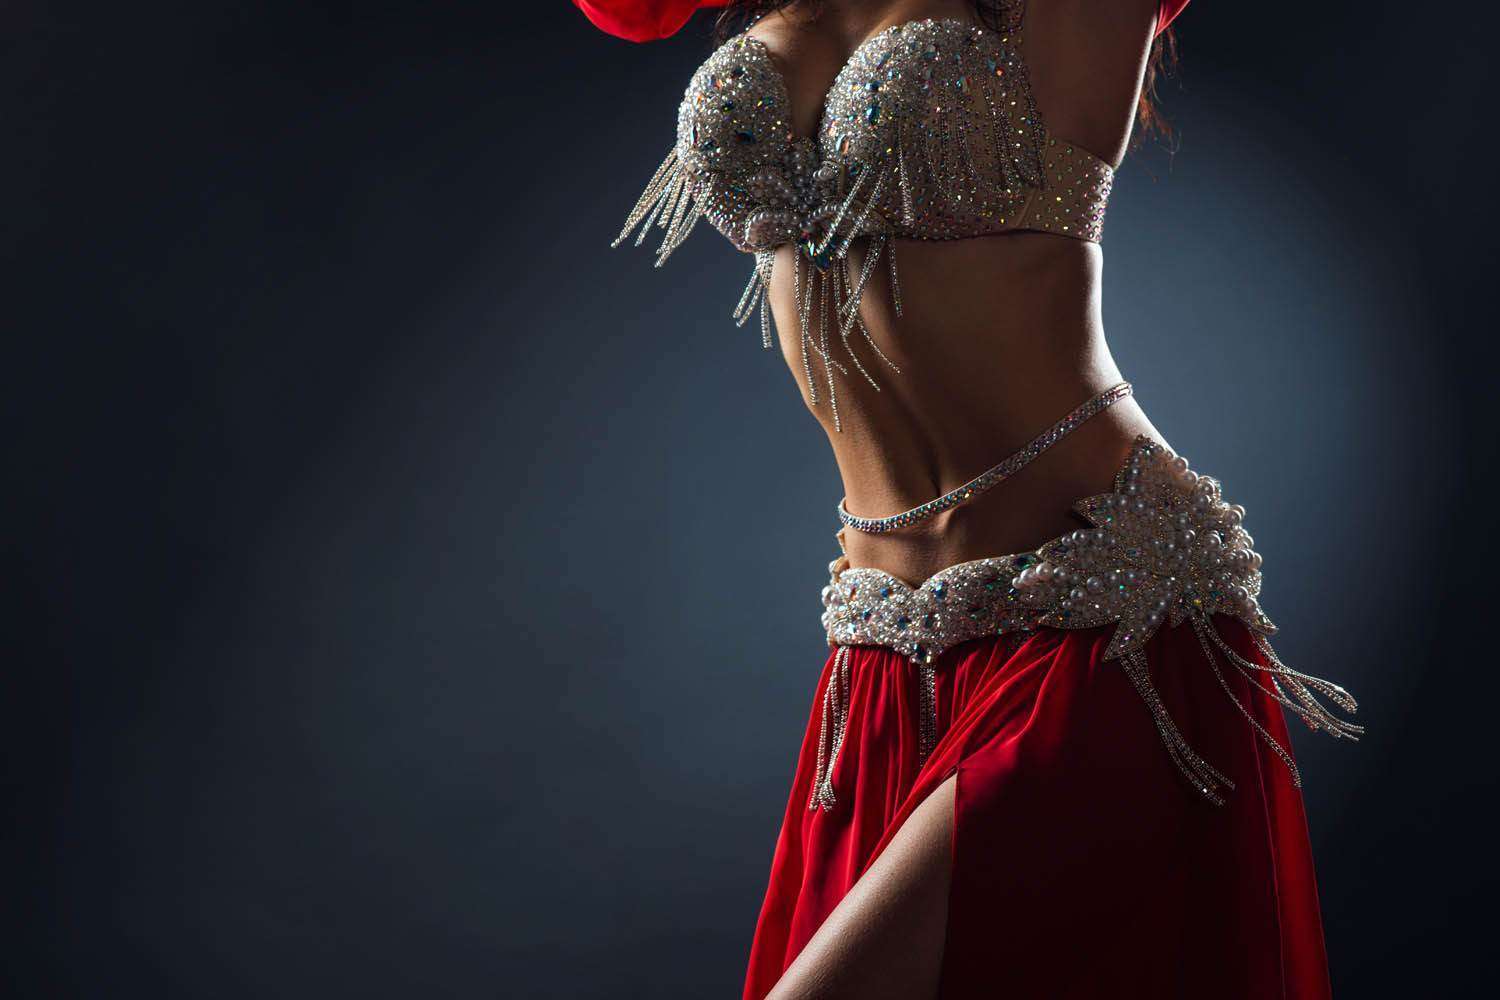 Beautiful belly dance of a girl in a red decorated ethnic dress